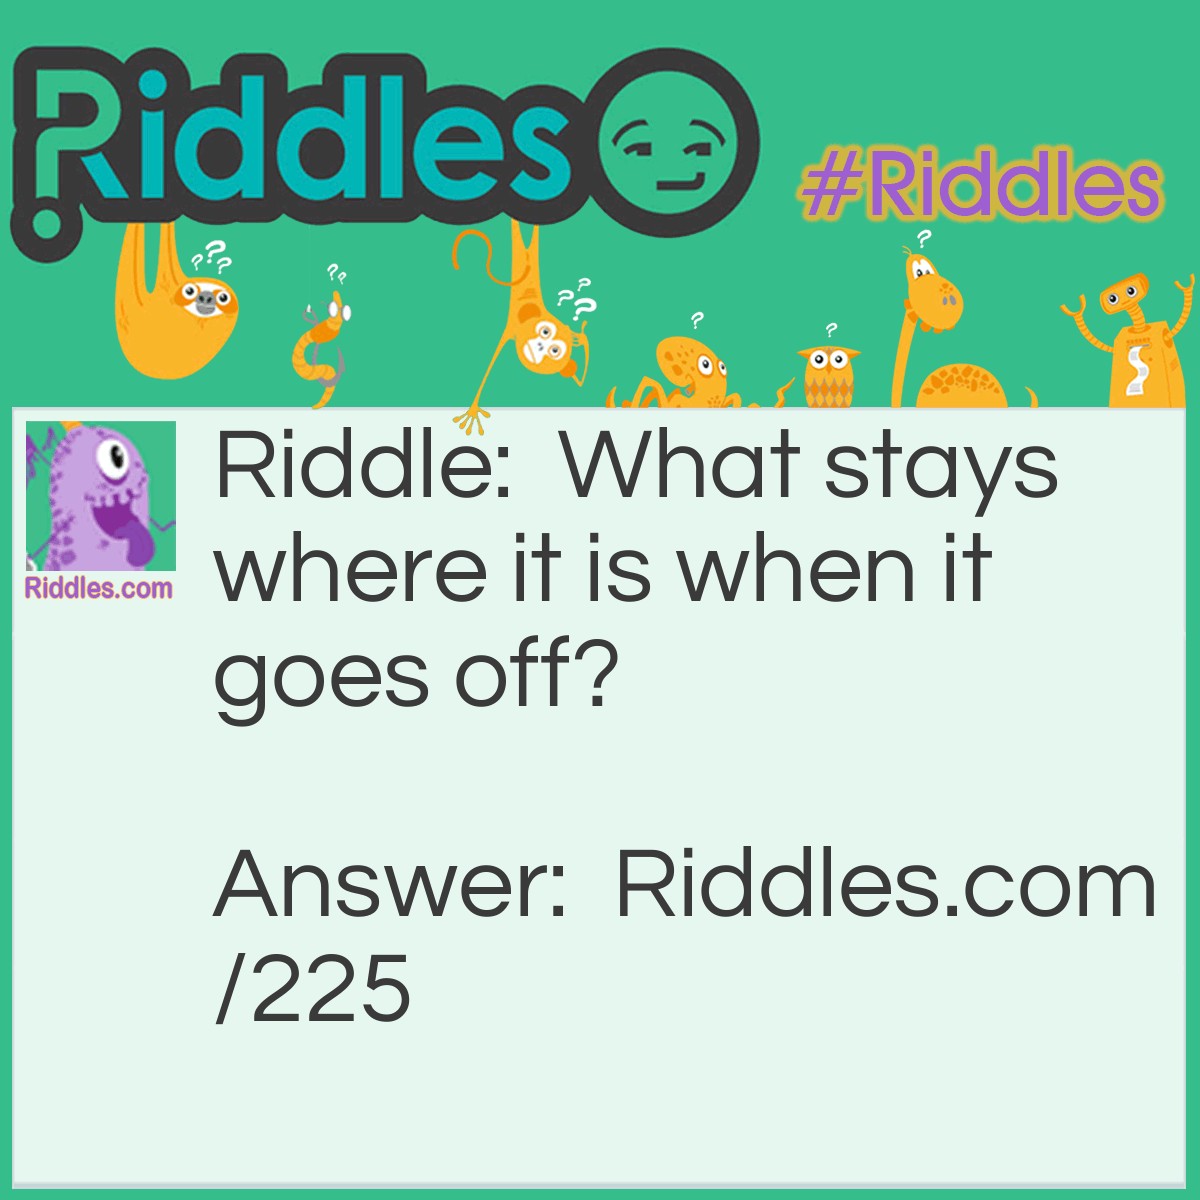 Riddle: What stays where it is when it goes off? Answer: A Gun.